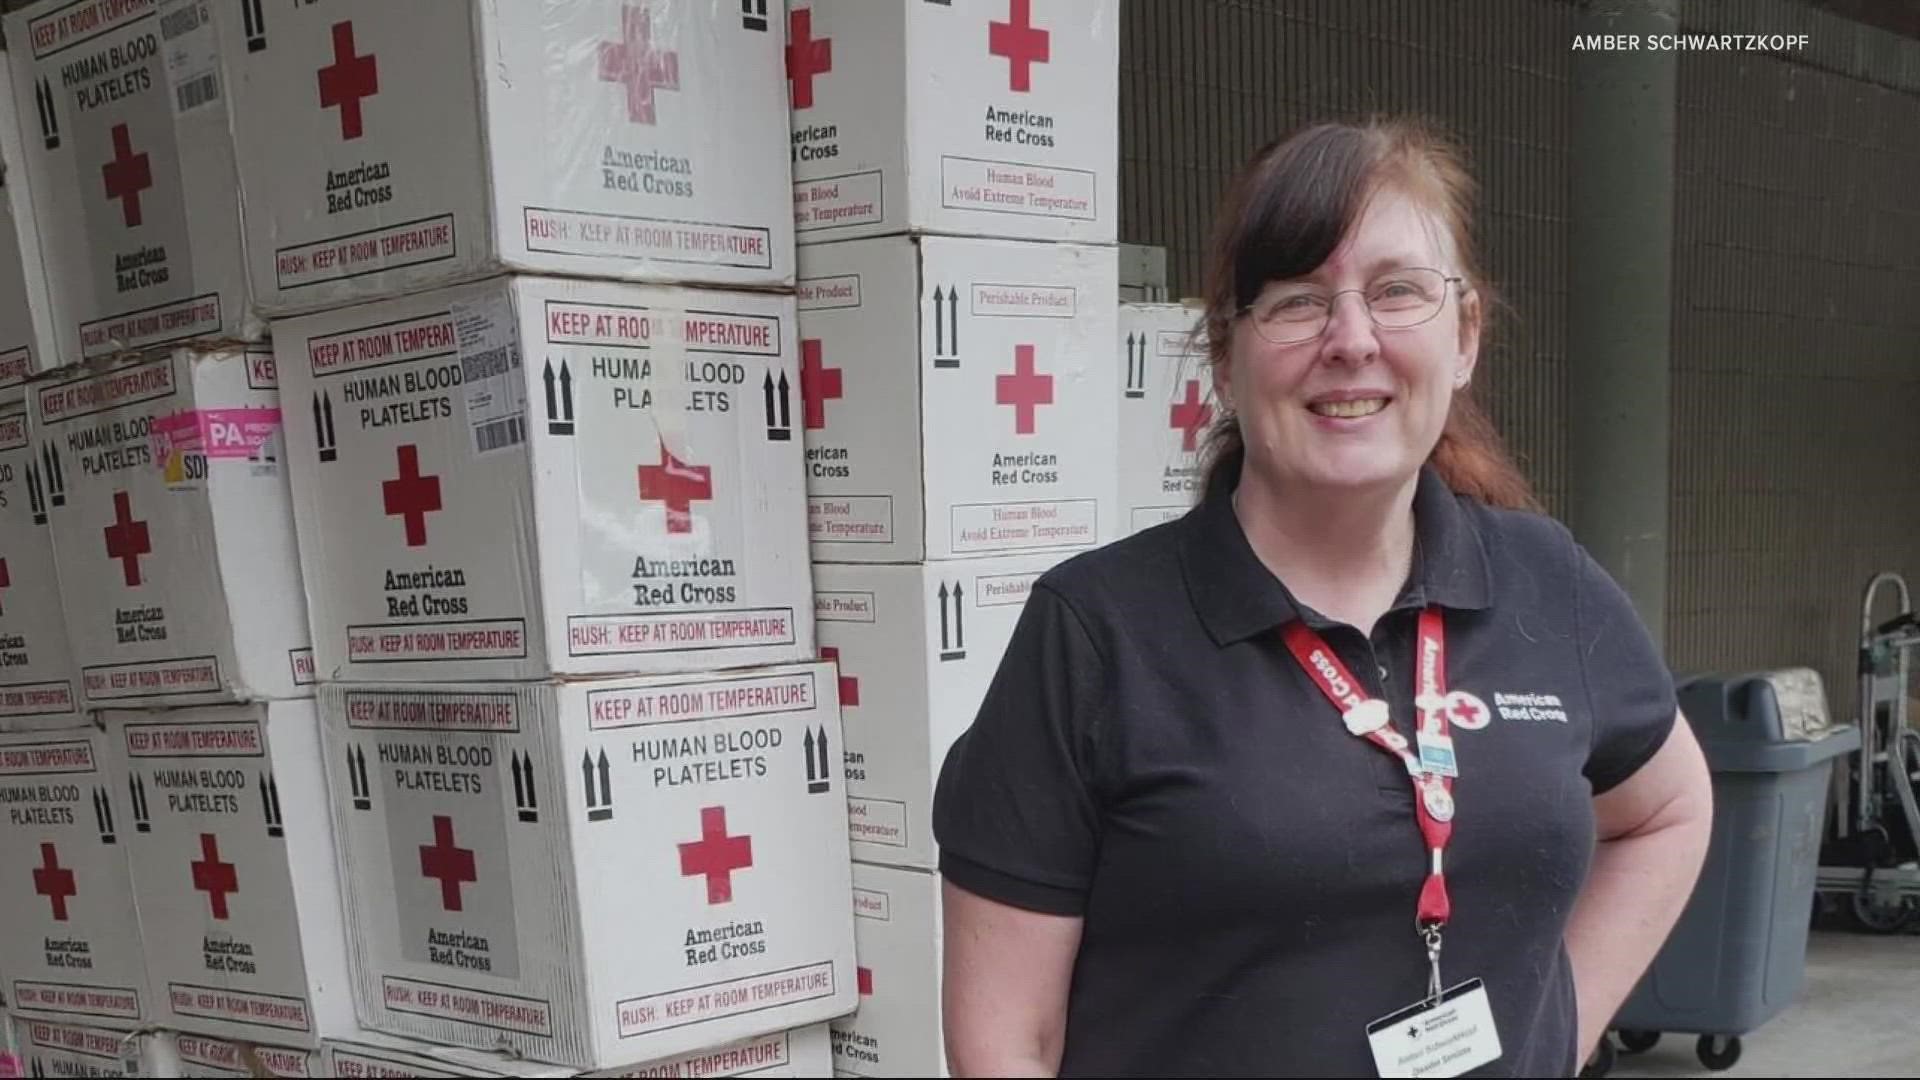 Several Red Cross volunteers from the Portland area are already on the ground in Florida assisting.